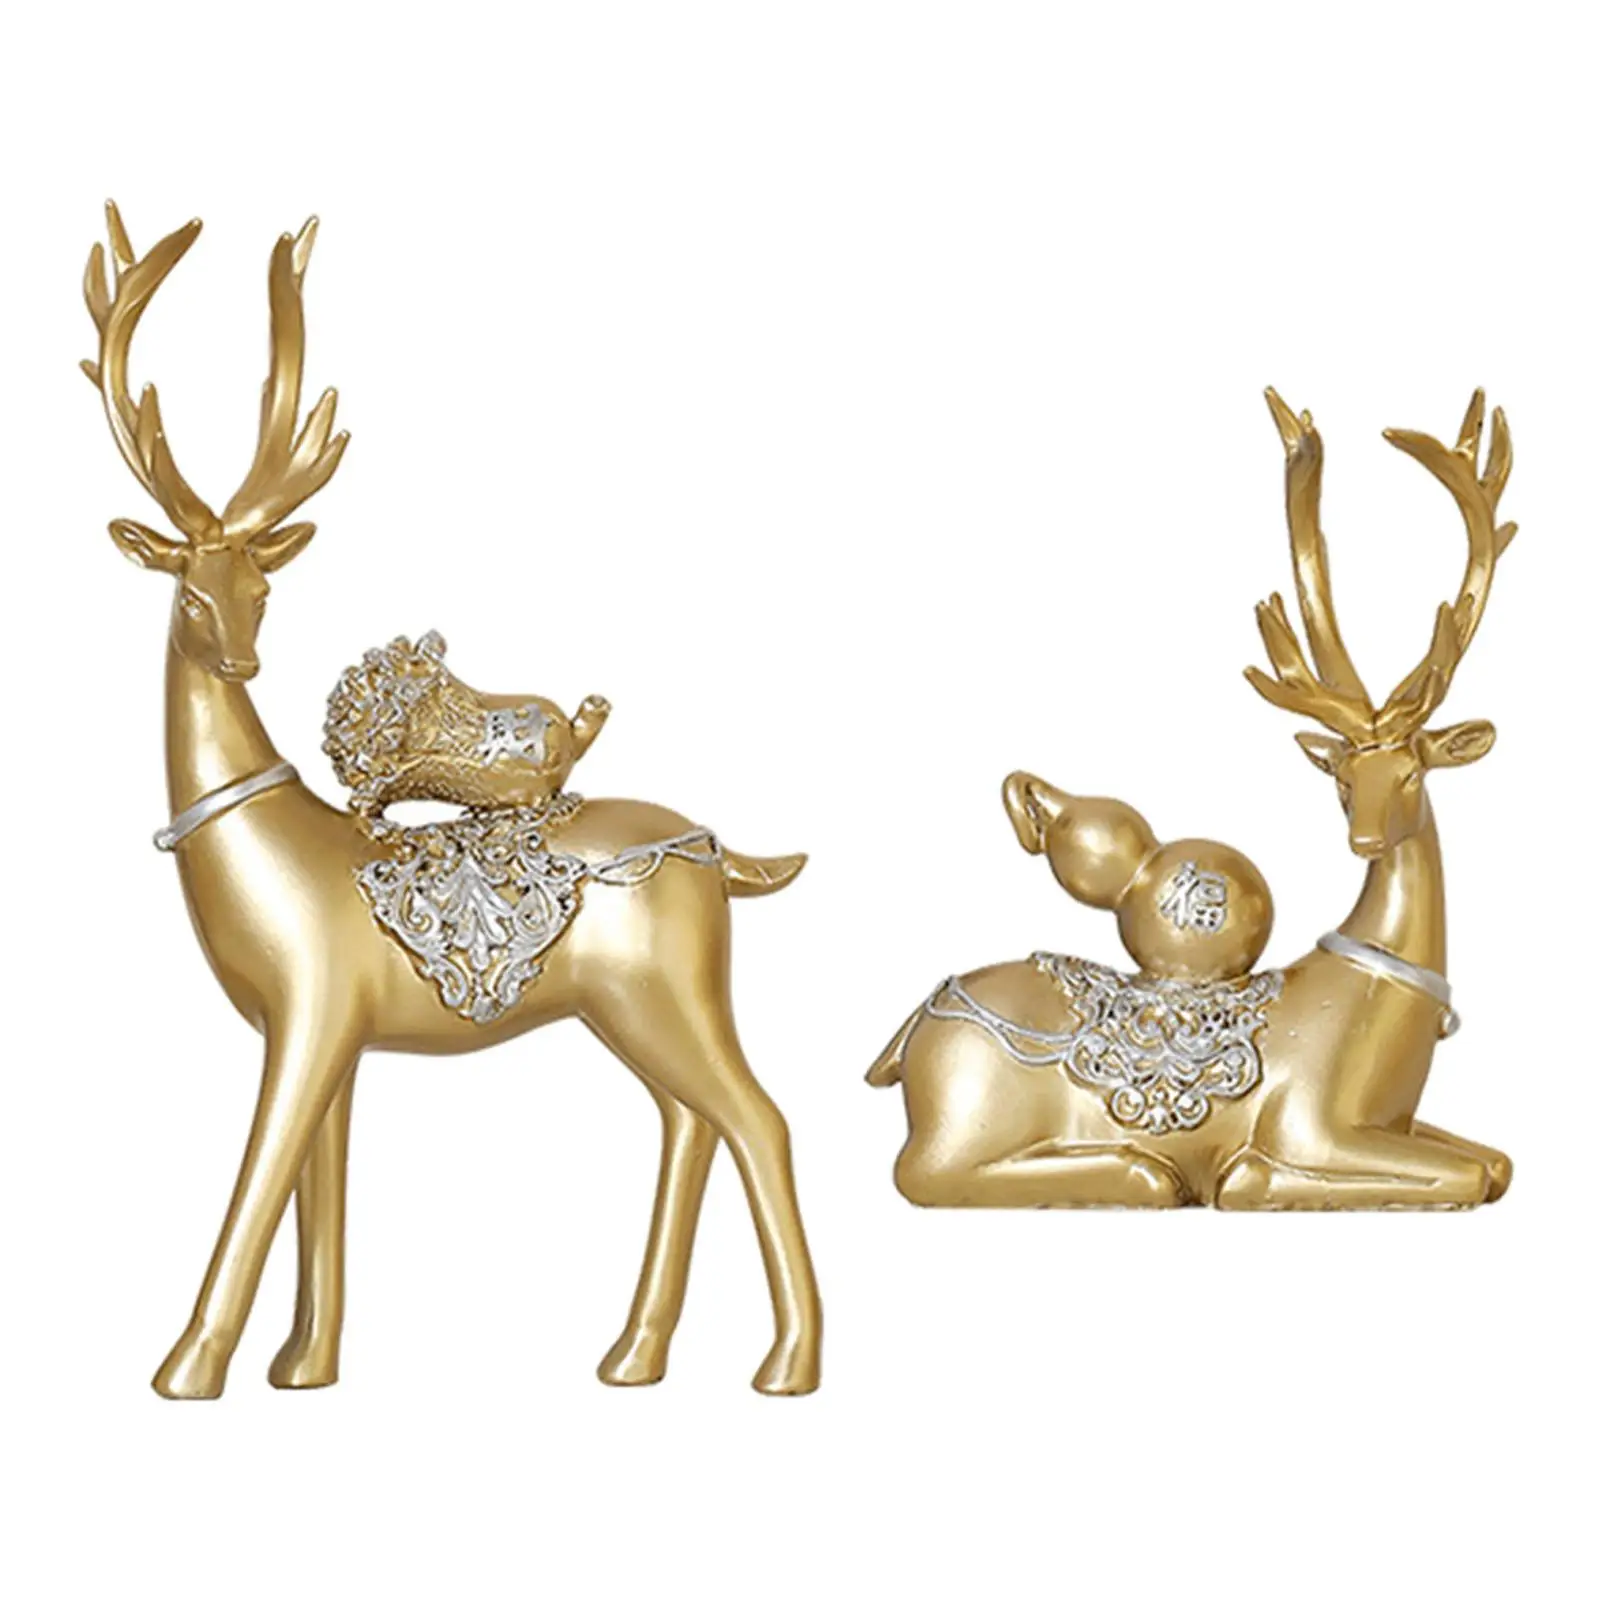 Reindeer Statue Table Collectable Craft Ornament for Bookshelf Decor Wedding